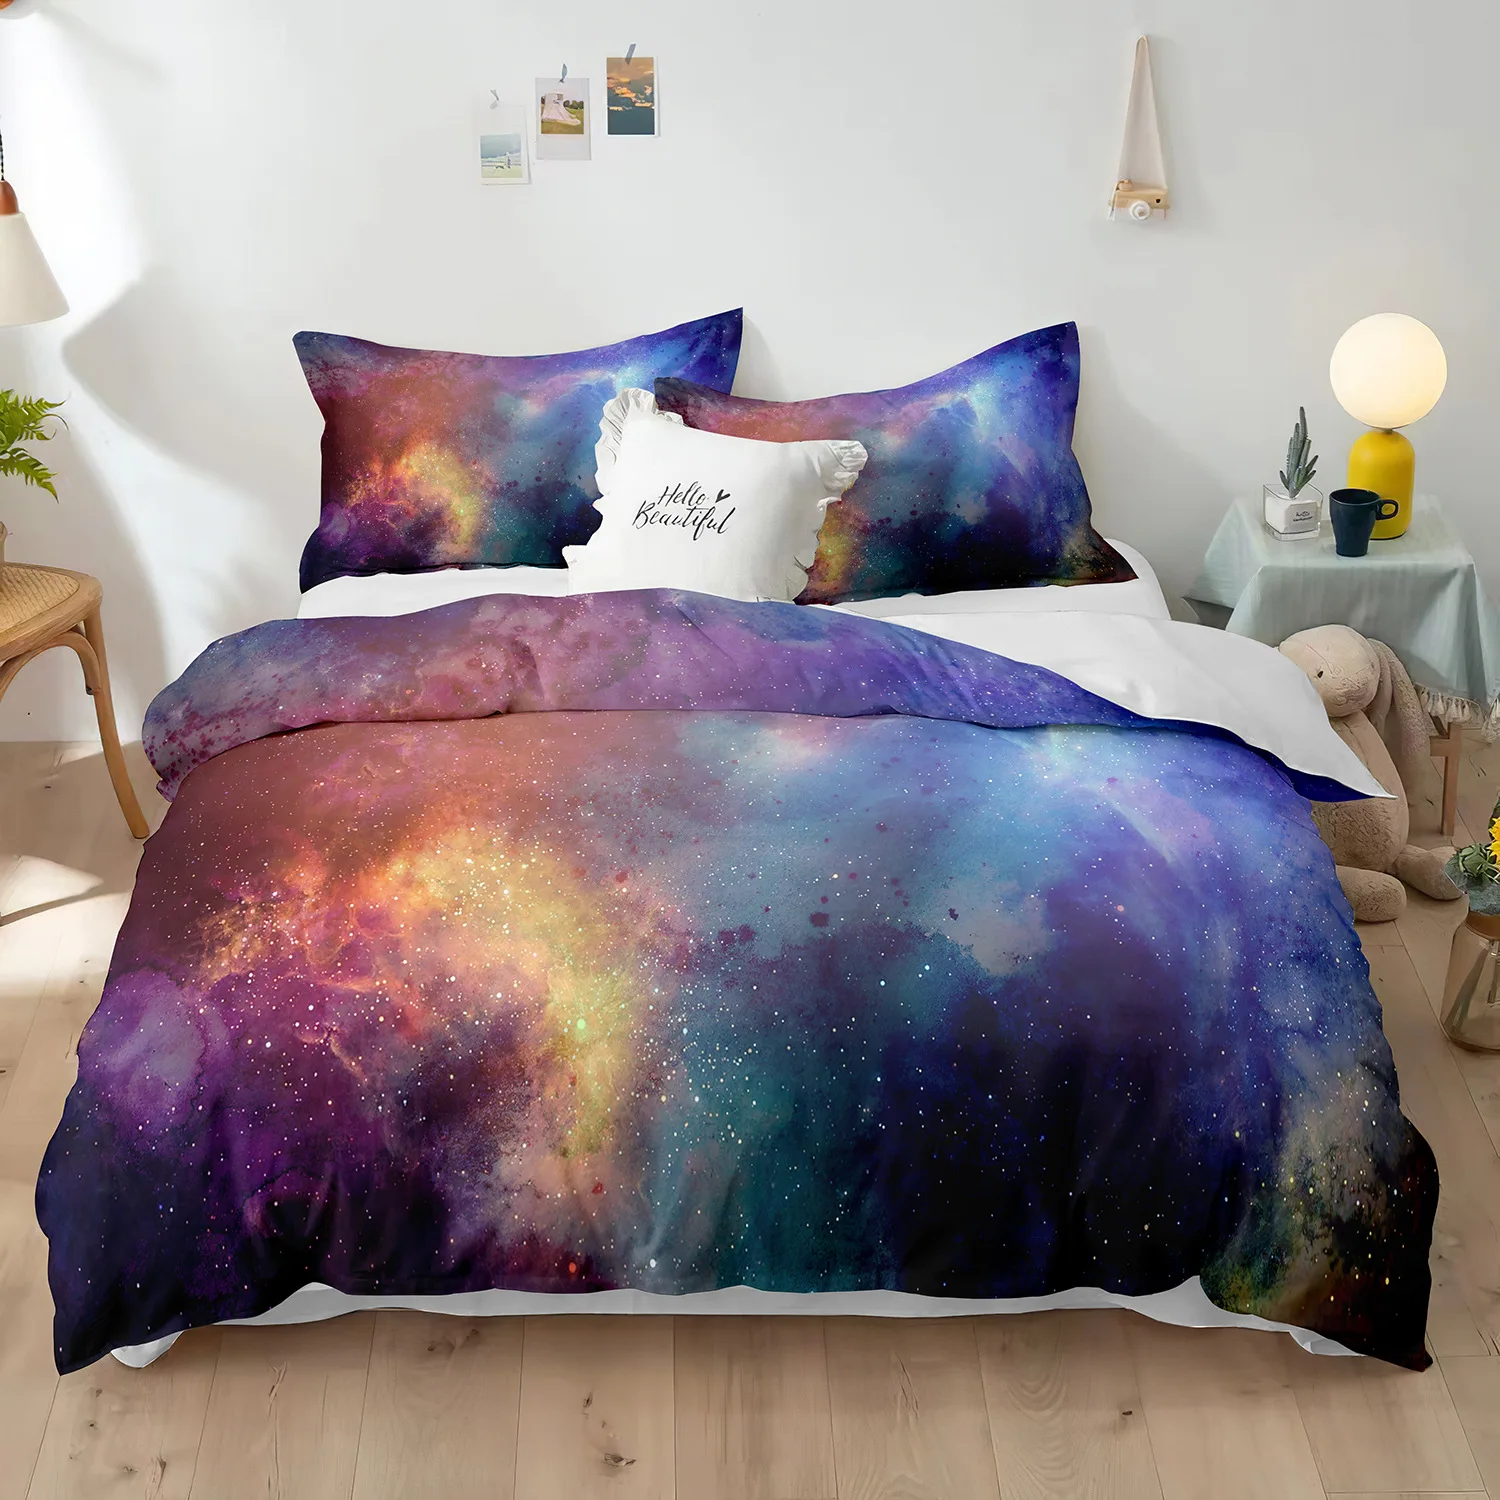 

Starry Sky Polyester Duvet Cover Set King Size White Star Colourful Galaxy Starry Space Nebula Abstract Cosmos for Boy Girl Kids